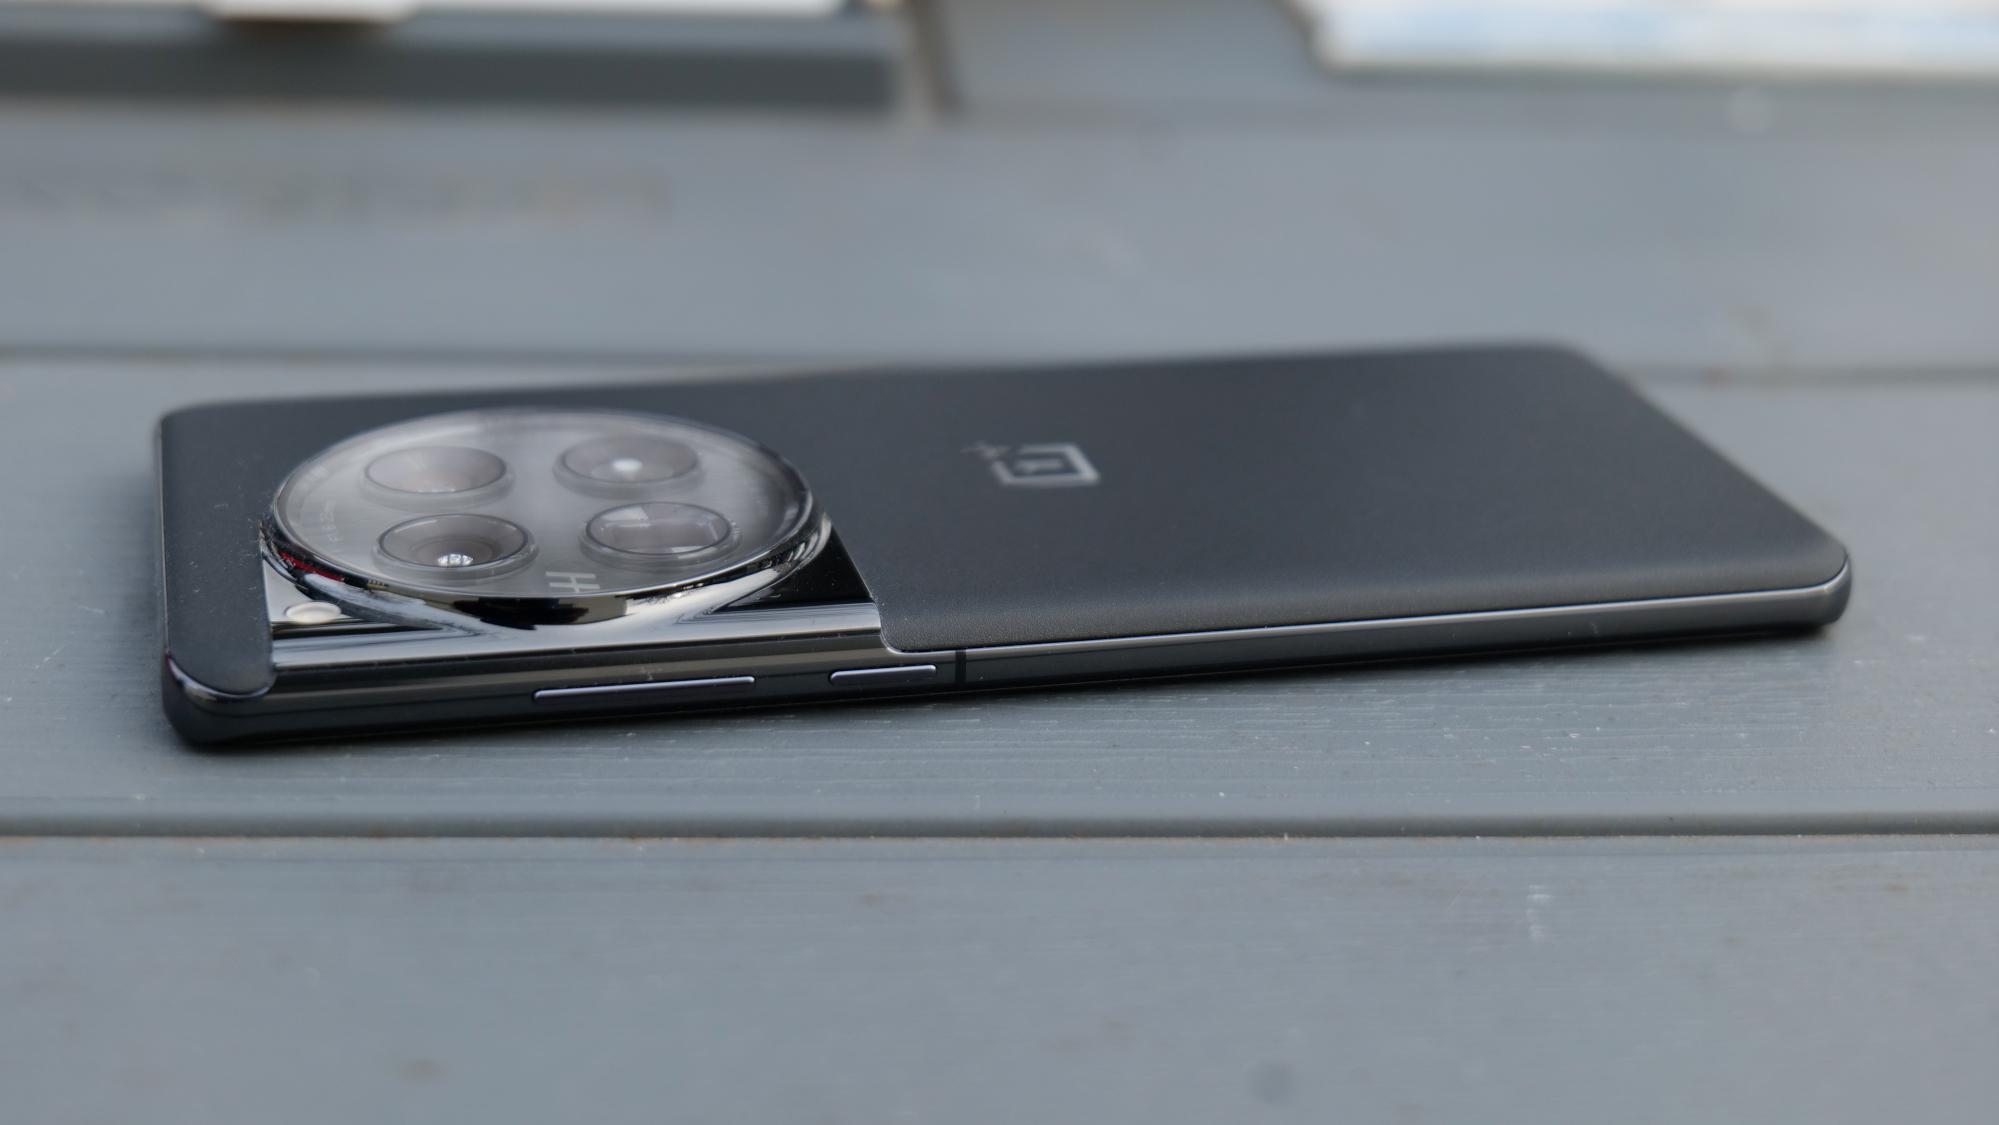 OnePlus 12 held in the hand.